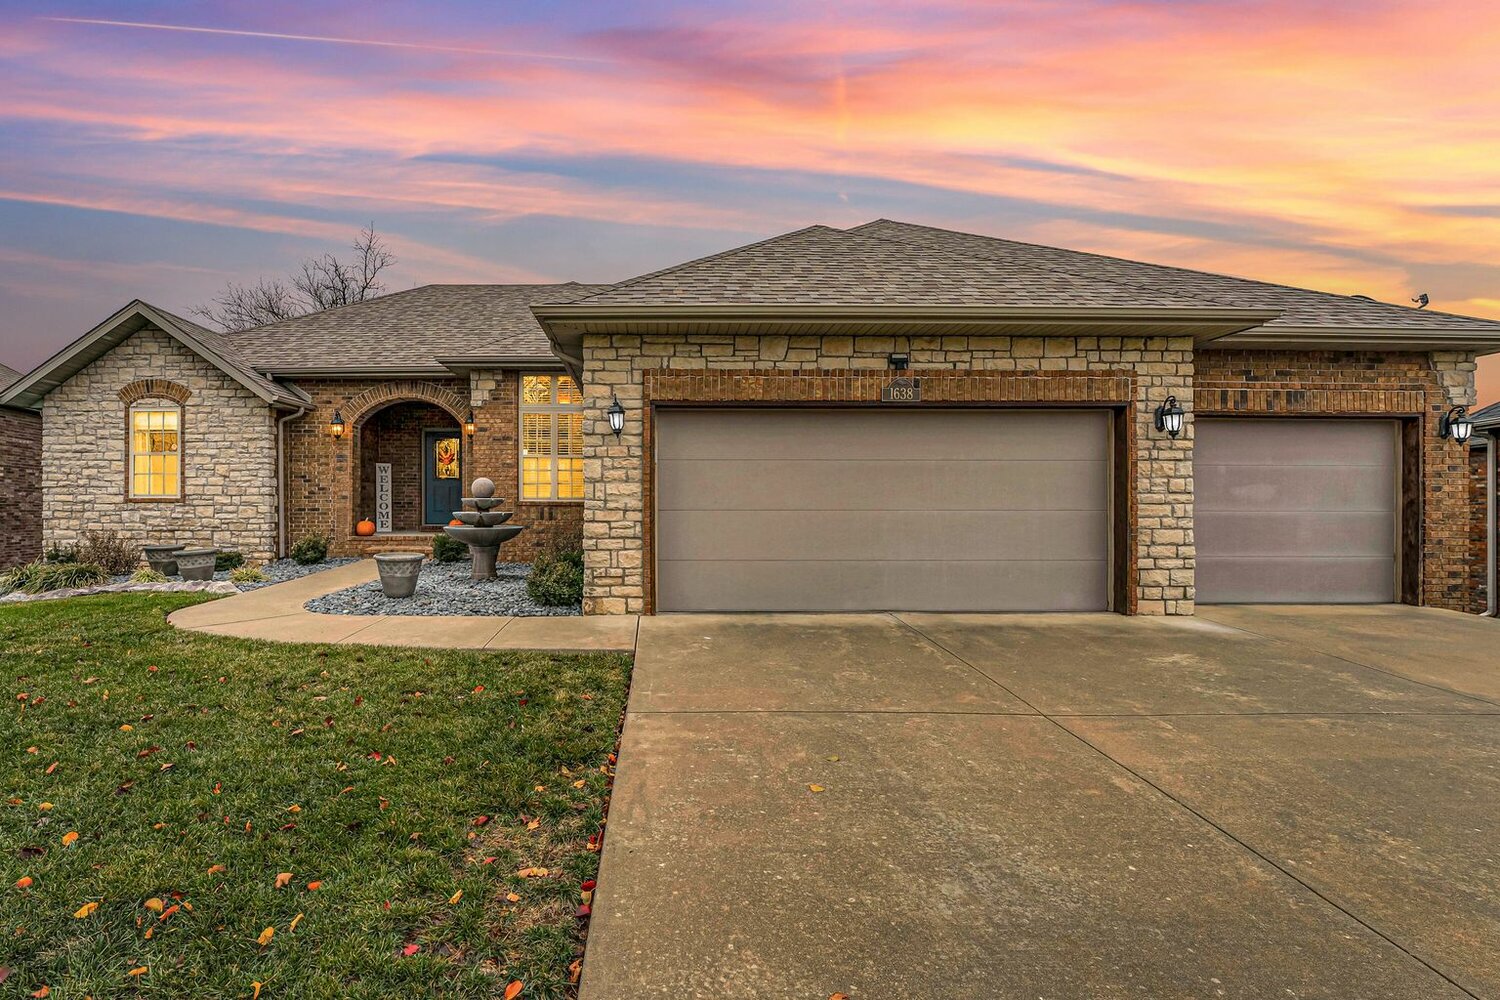 1638 N. Waterstone Ave.
$614,900
Bedrooms: 5
Bathrooms: 3
Listing firm: Southwest Missouri Realty